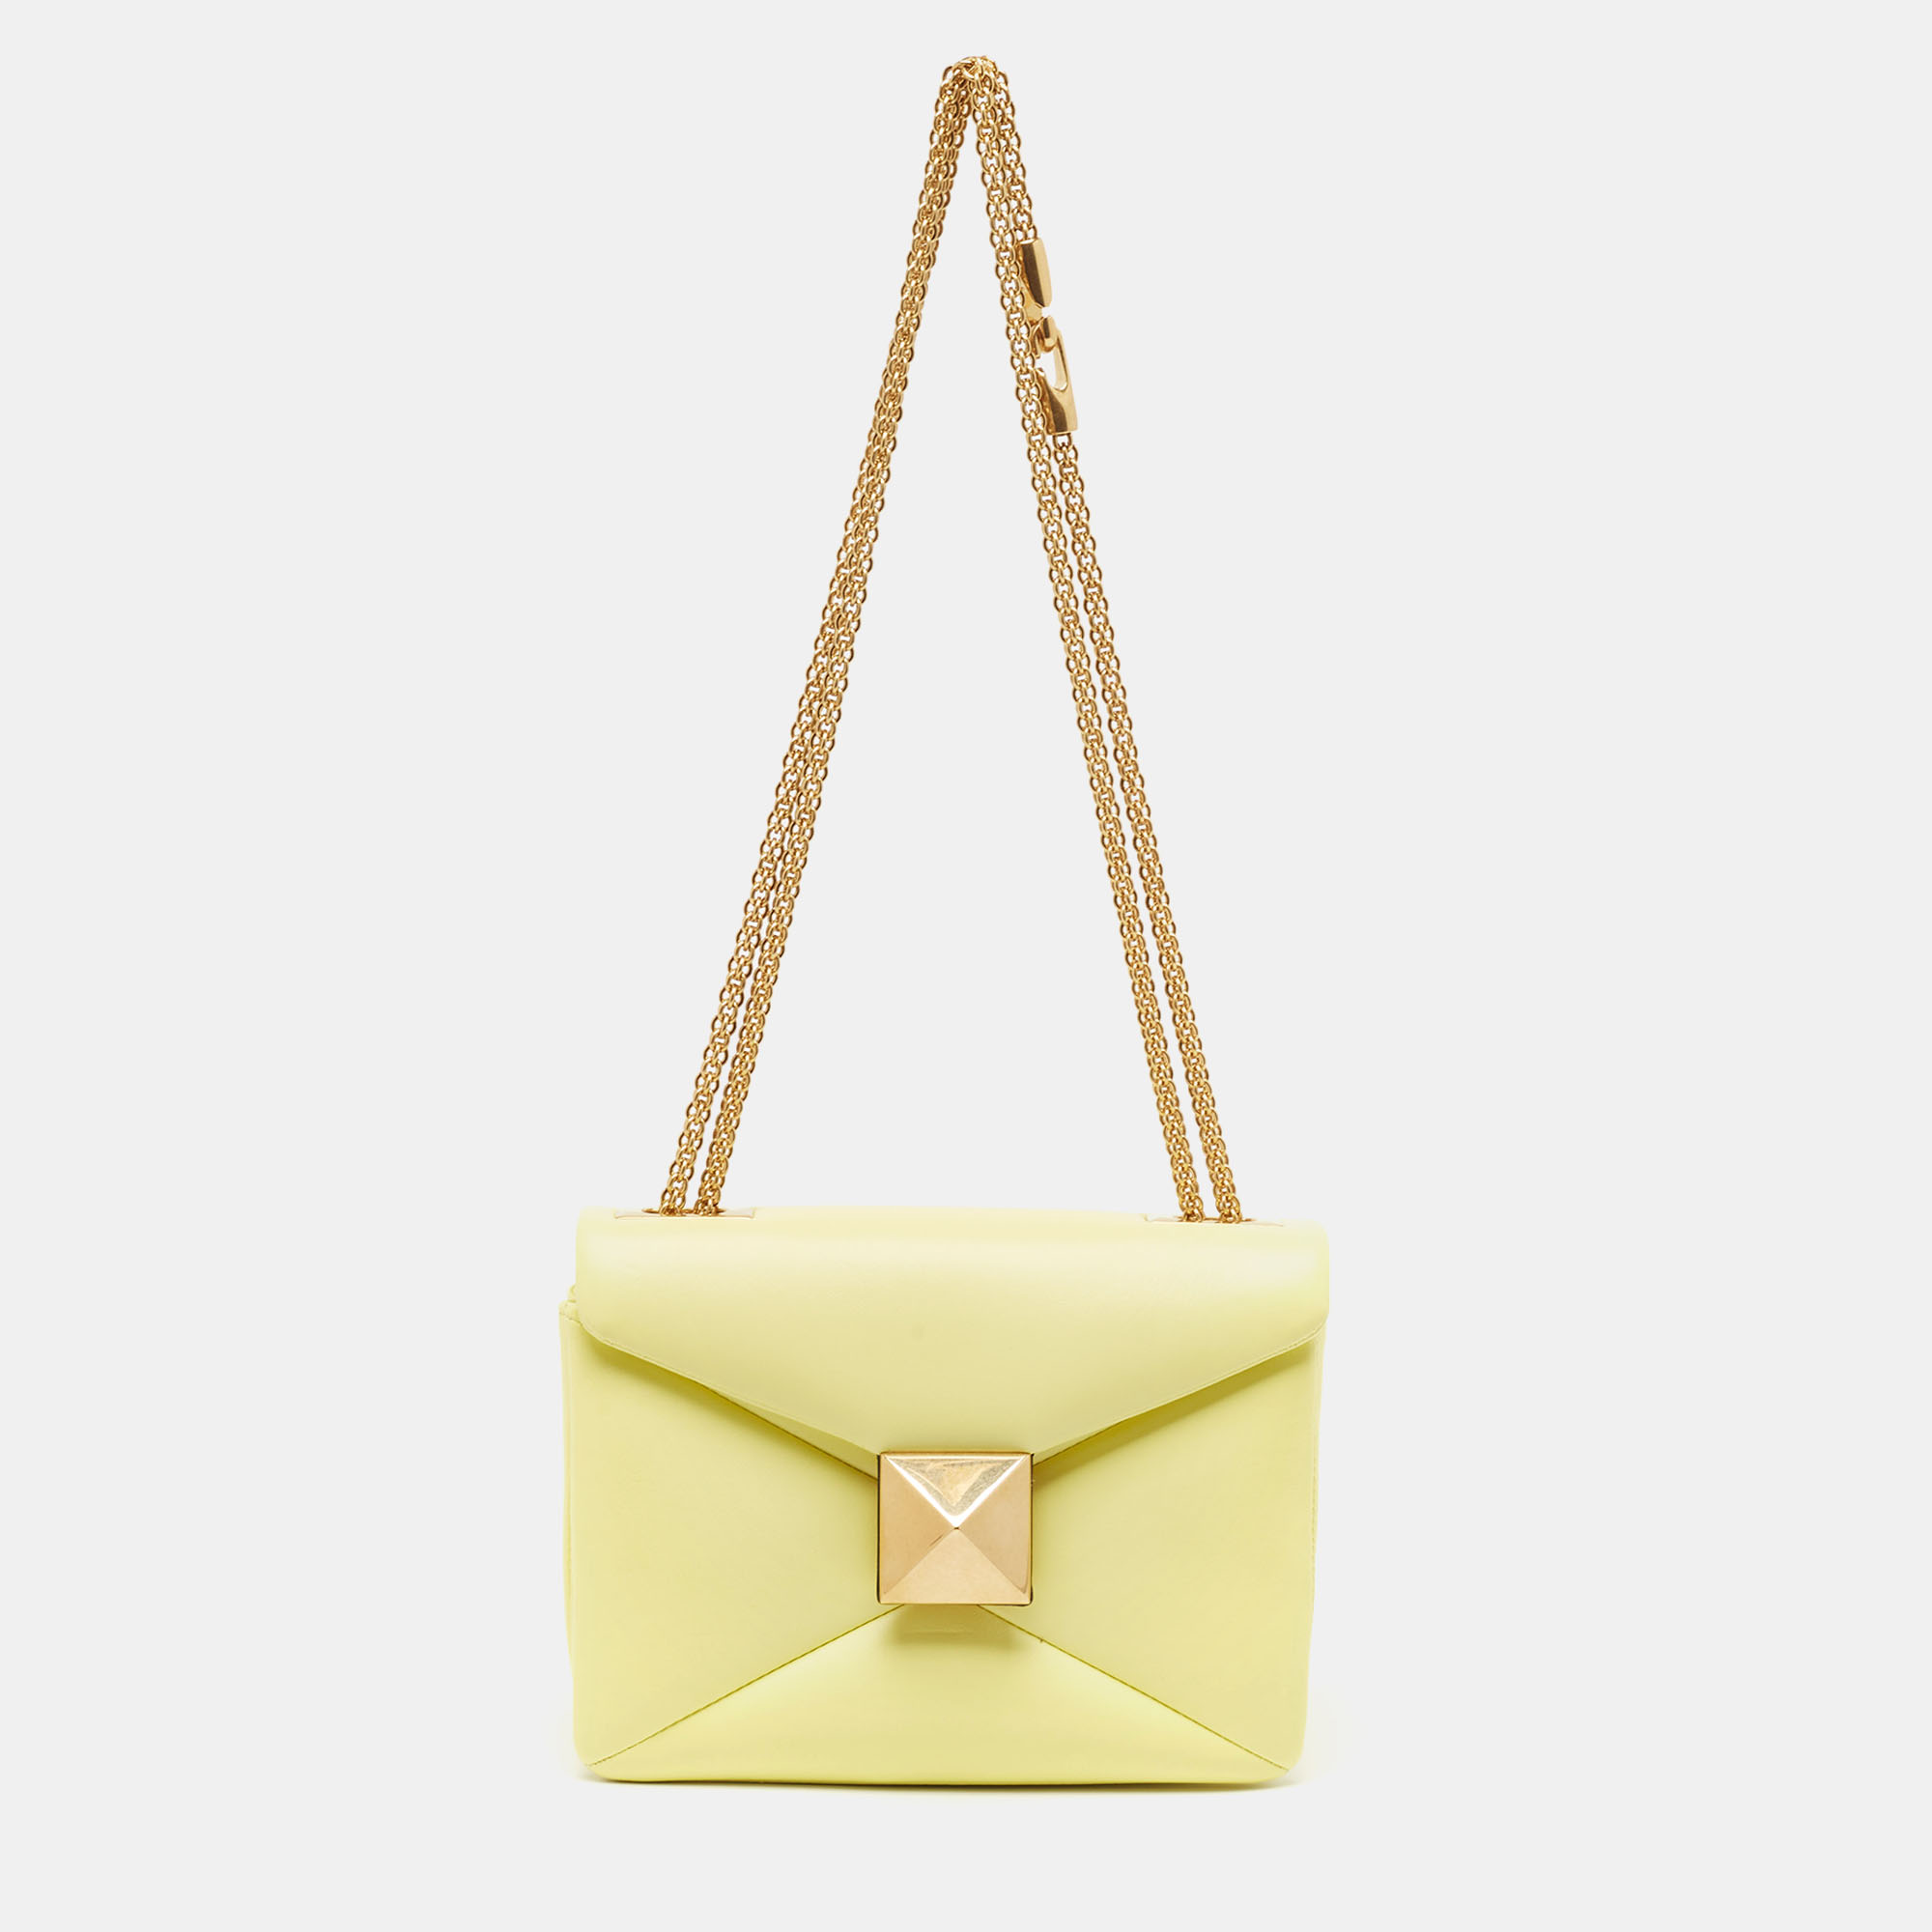 Valentino yellow leather one stud chain bag